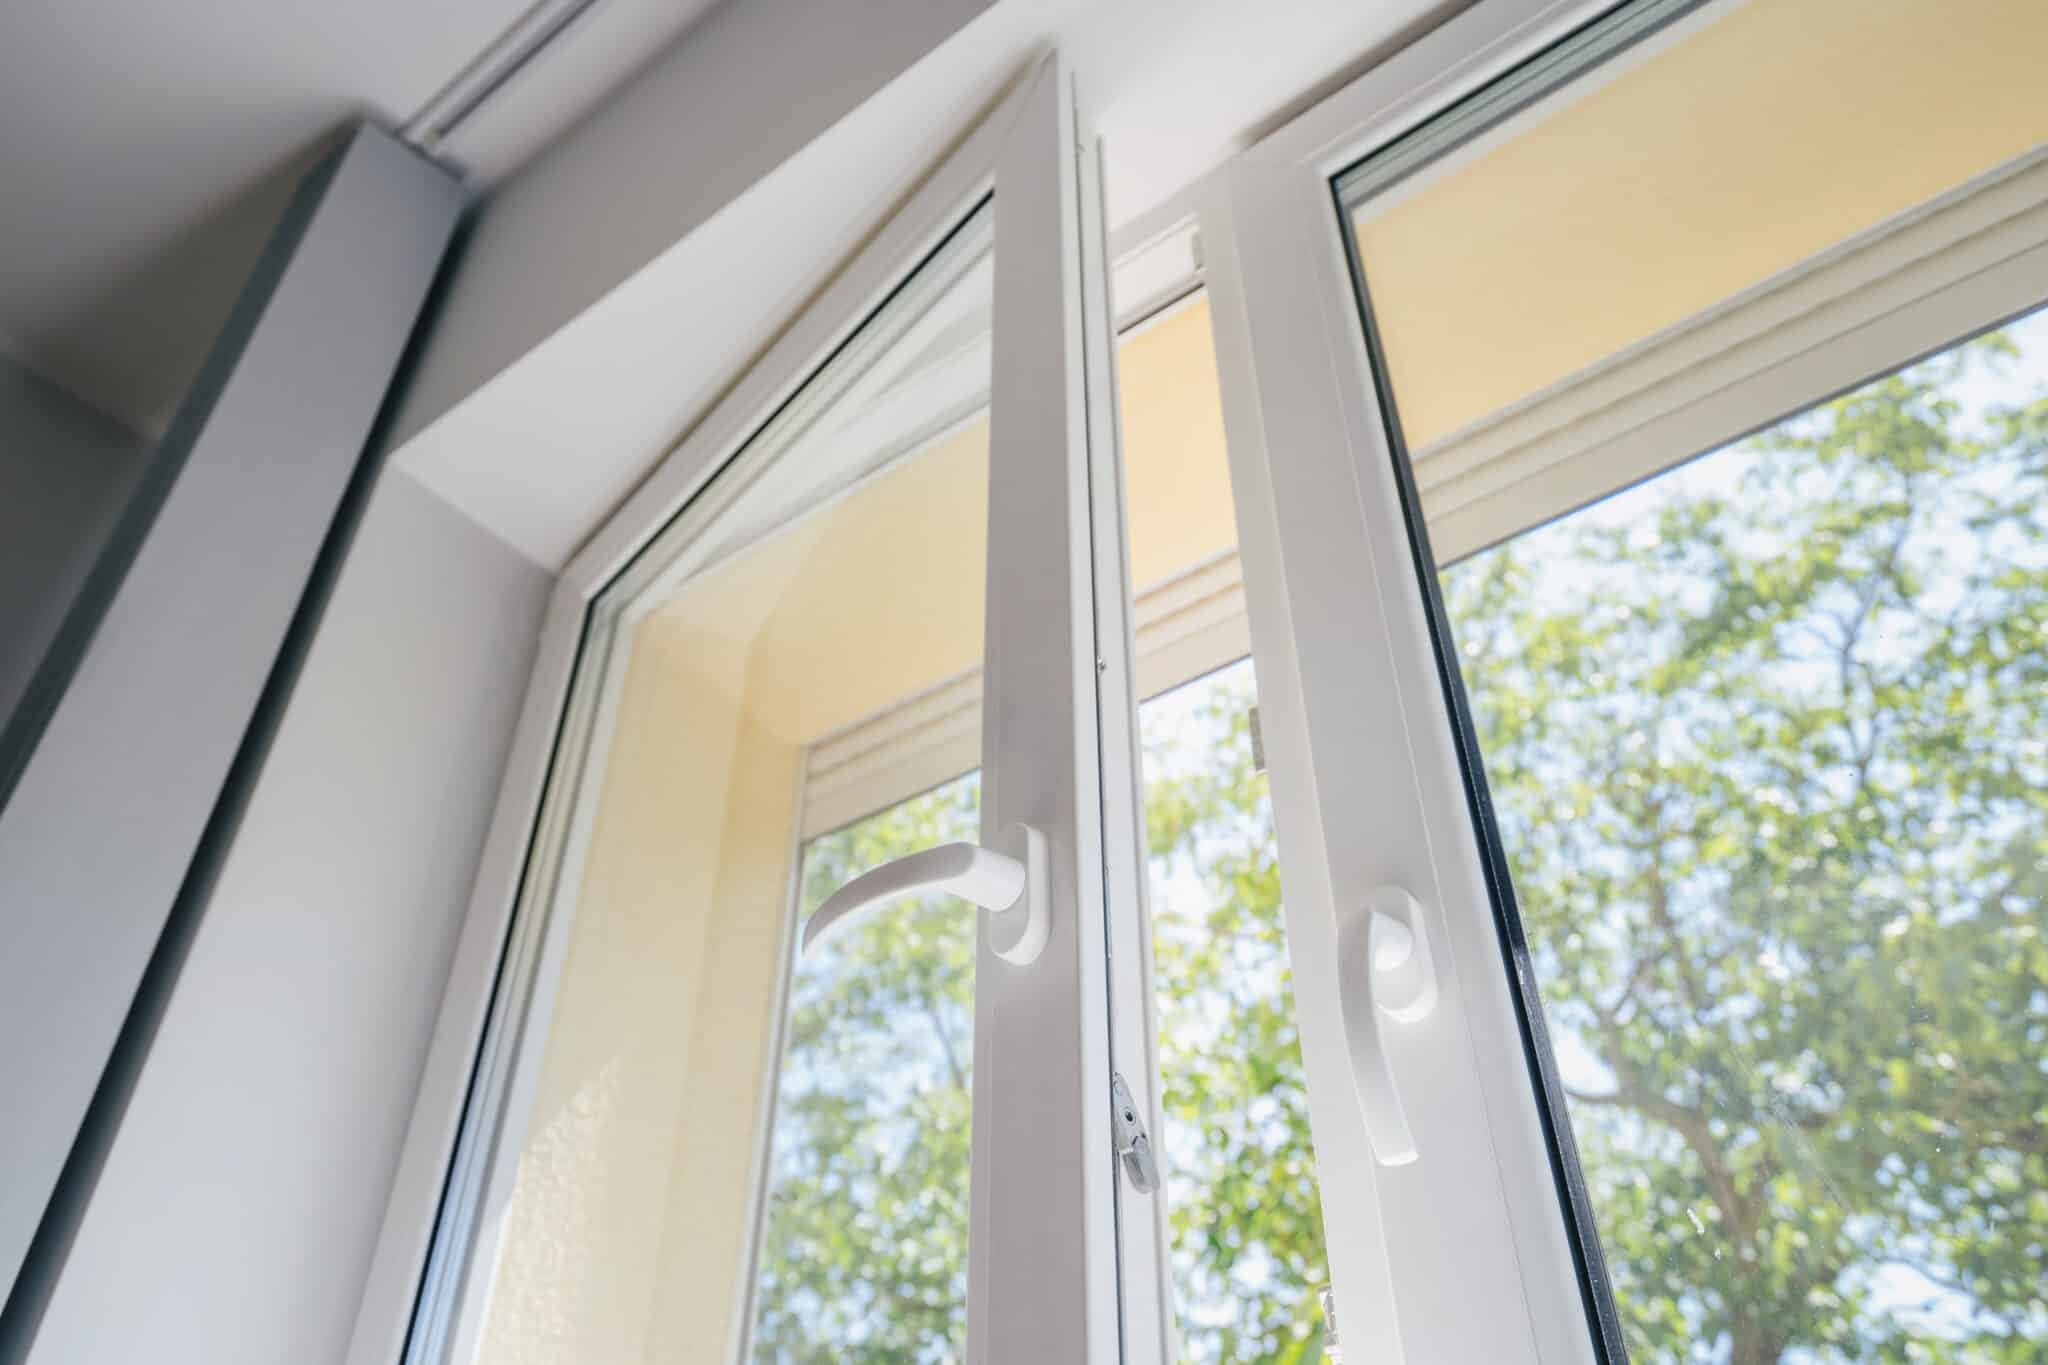 The Advantages of Double-Paned Windows: Energy Efficiency and Noise Reduction